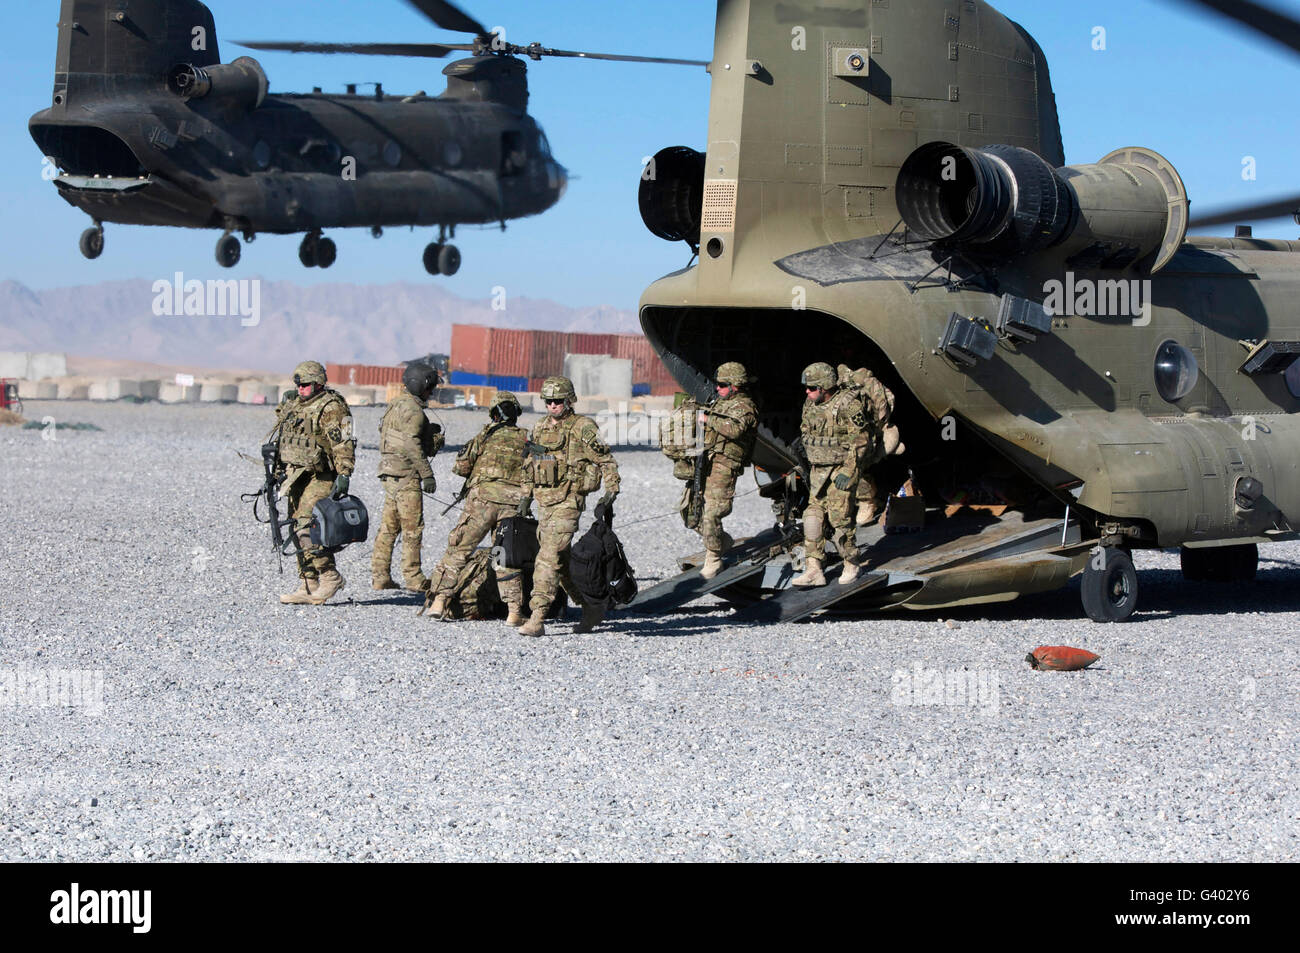 U.S. soldiers offload a CH-47 Chinook helicopter. Stock Photo